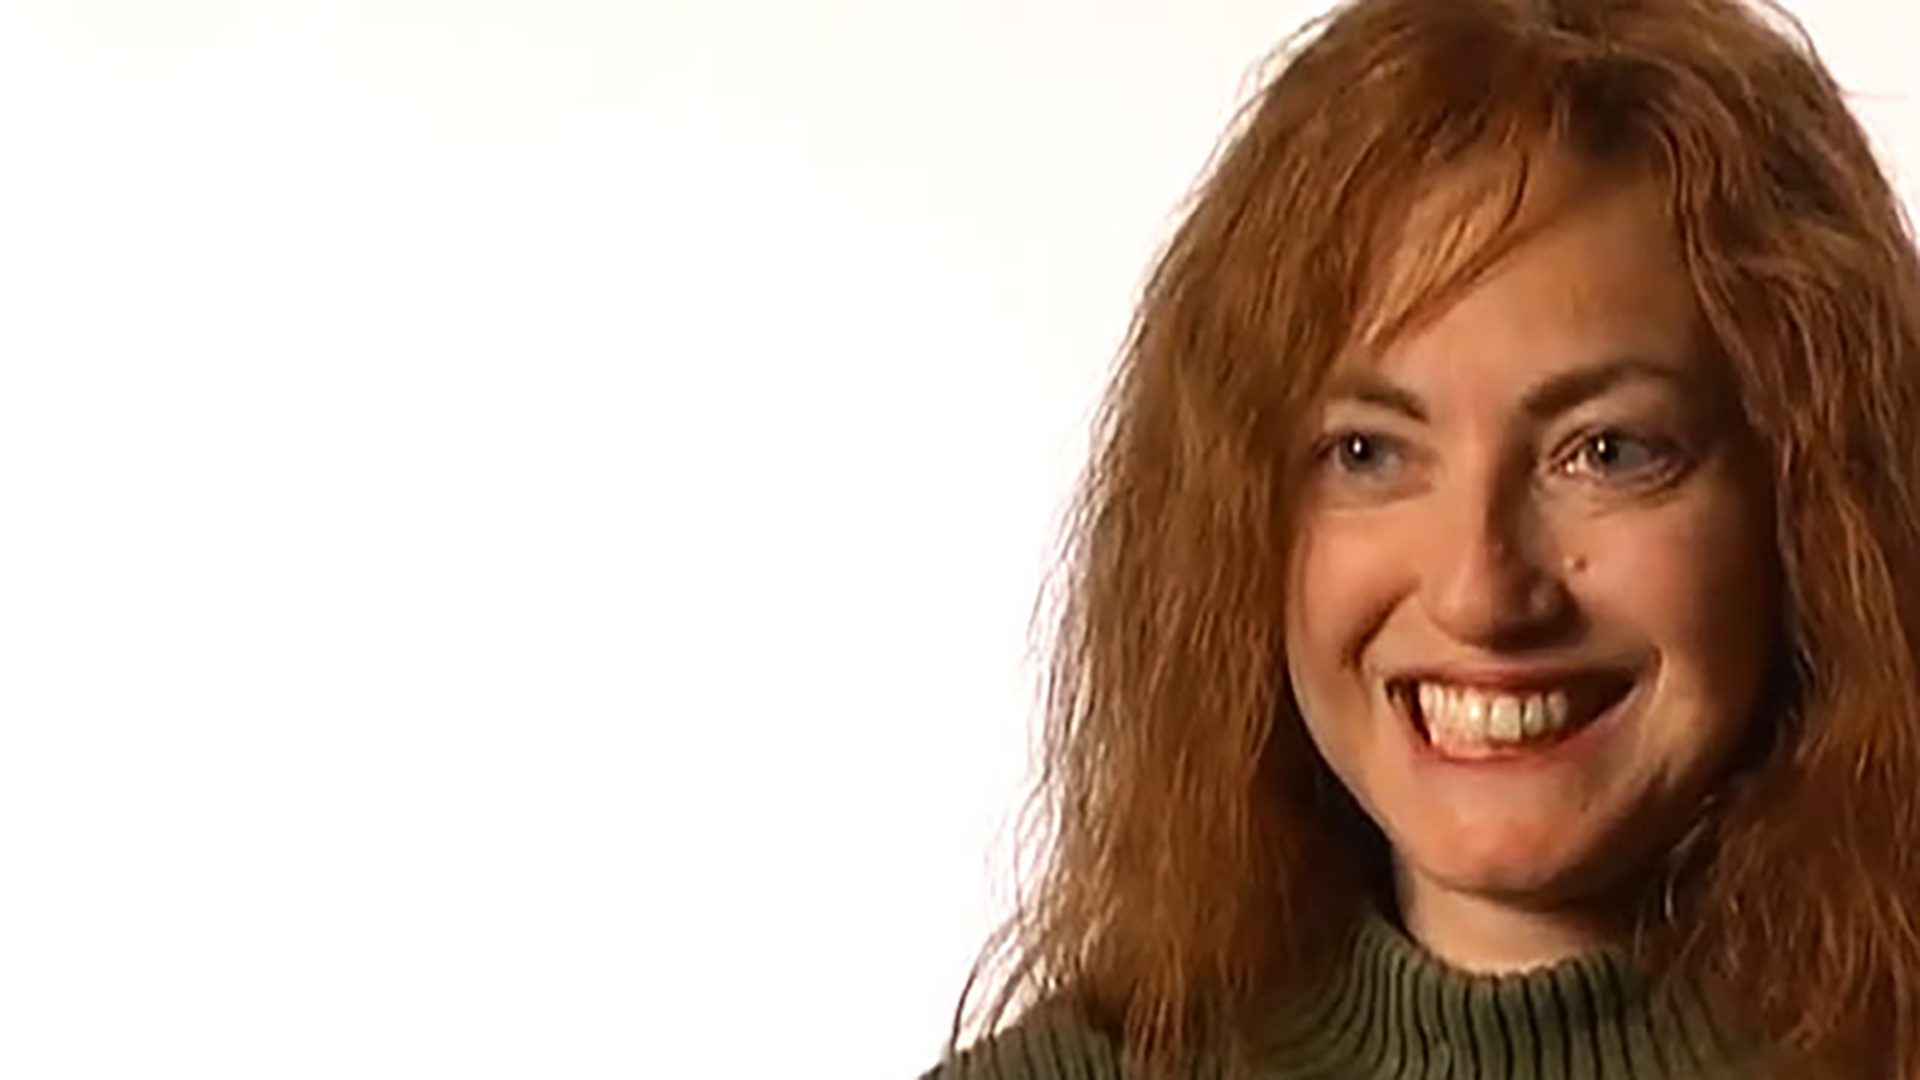 A young adult woman with red hair wears an olive green sweater and is interviewed against a white background.